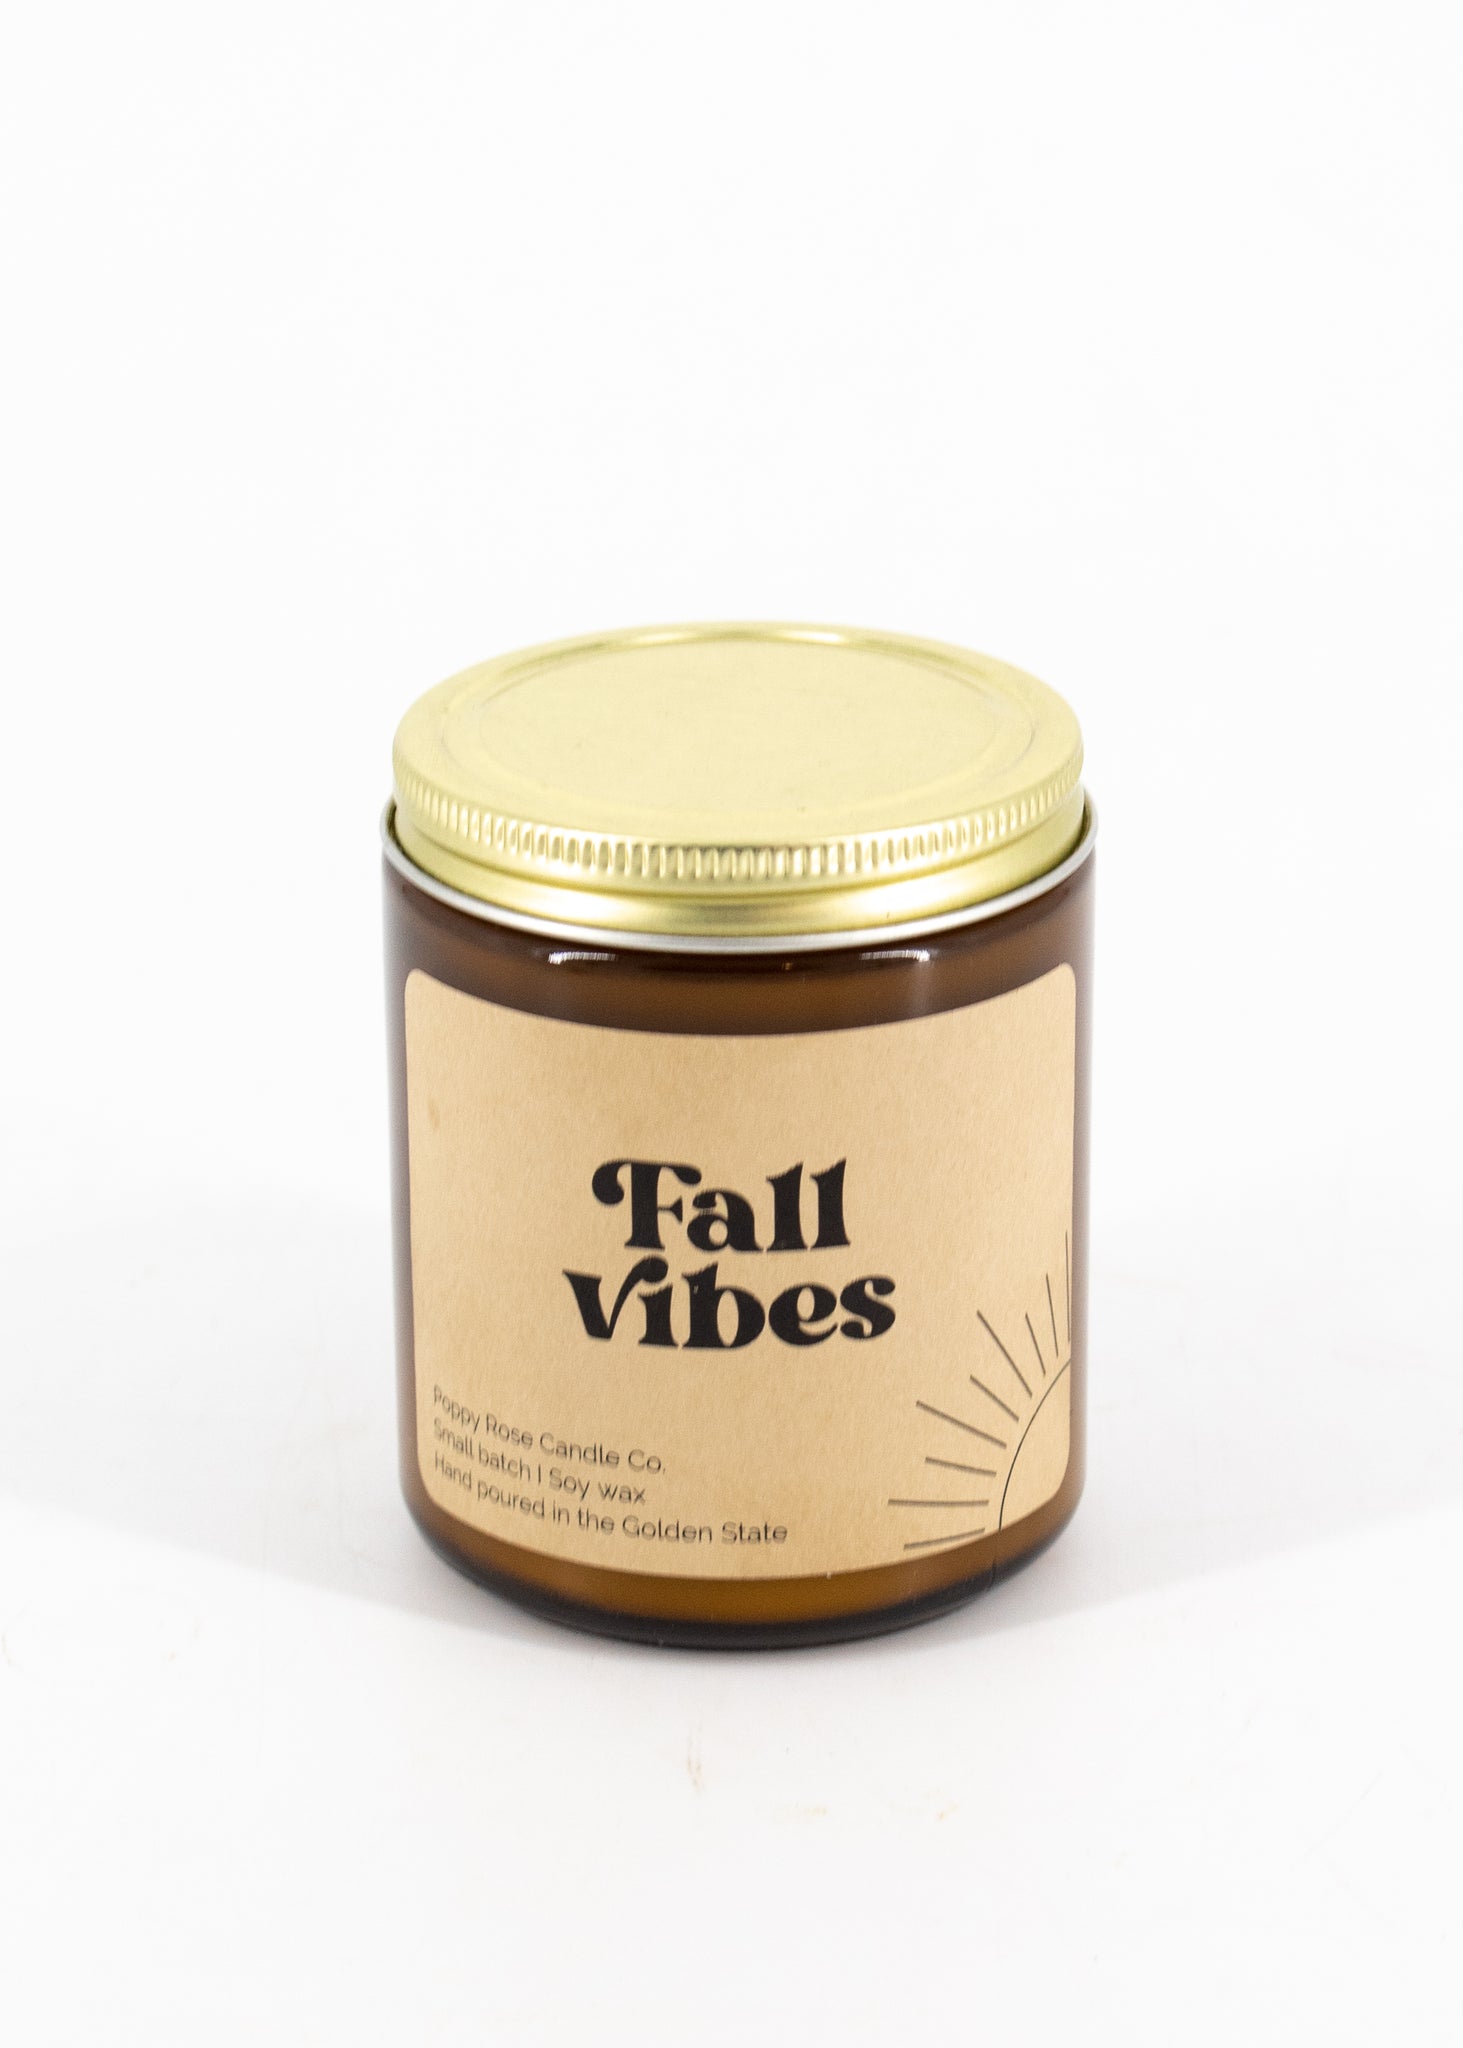 SALE! "Fall Vibes" Candle -  - Poppy & Rose Candle Co. - Wild Lark